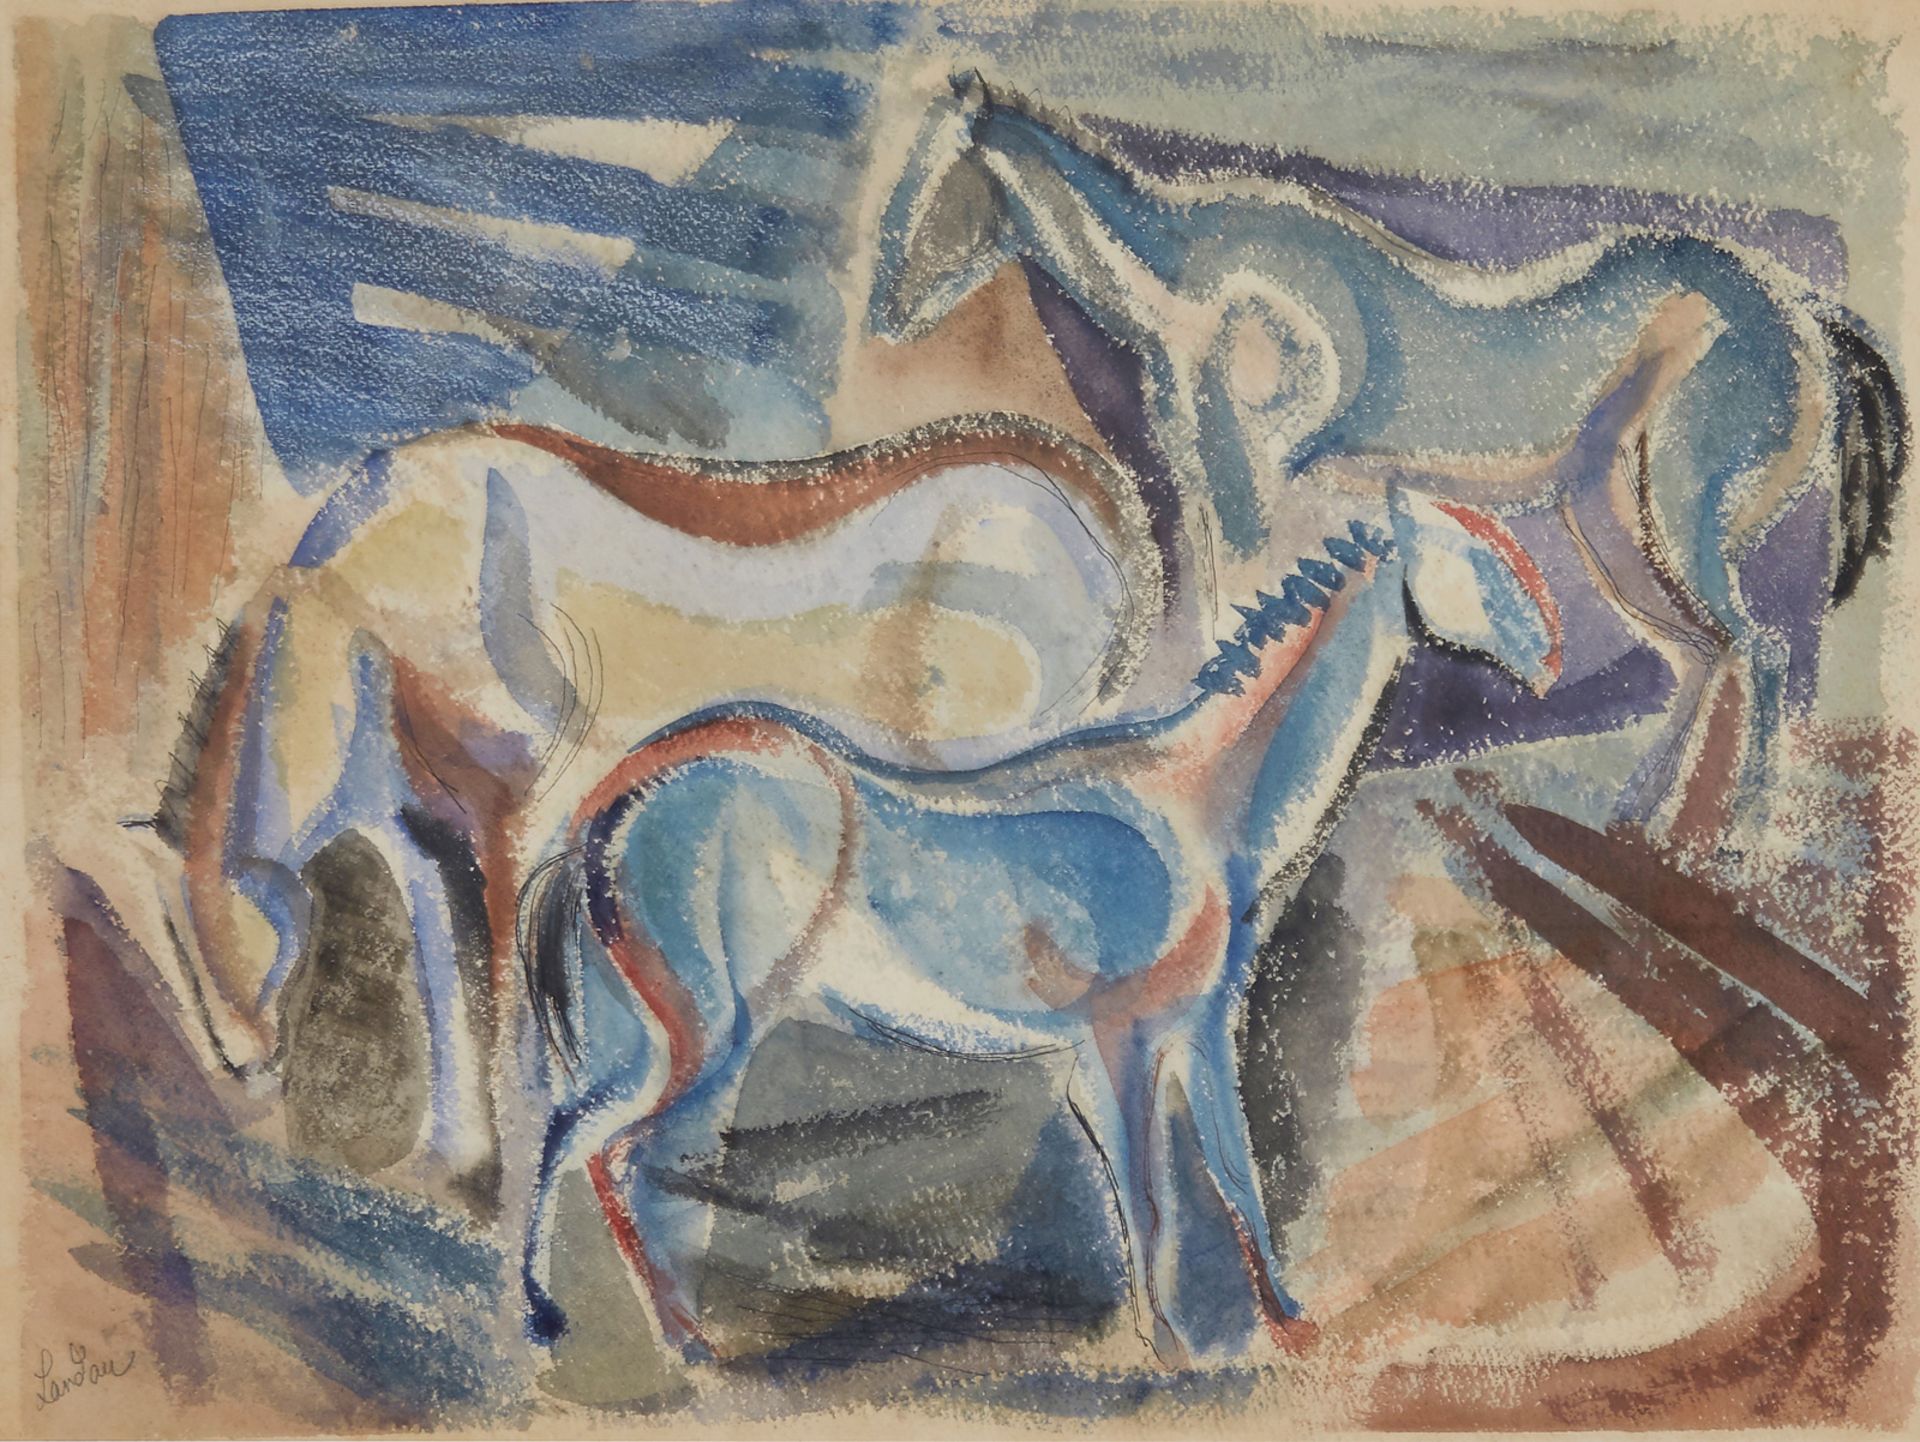 SIGMUND LANDAU (POLISH 1898-1962)   The Horses ,  watercolor and ink on paper 42 x 56 cm (16 1/2 x